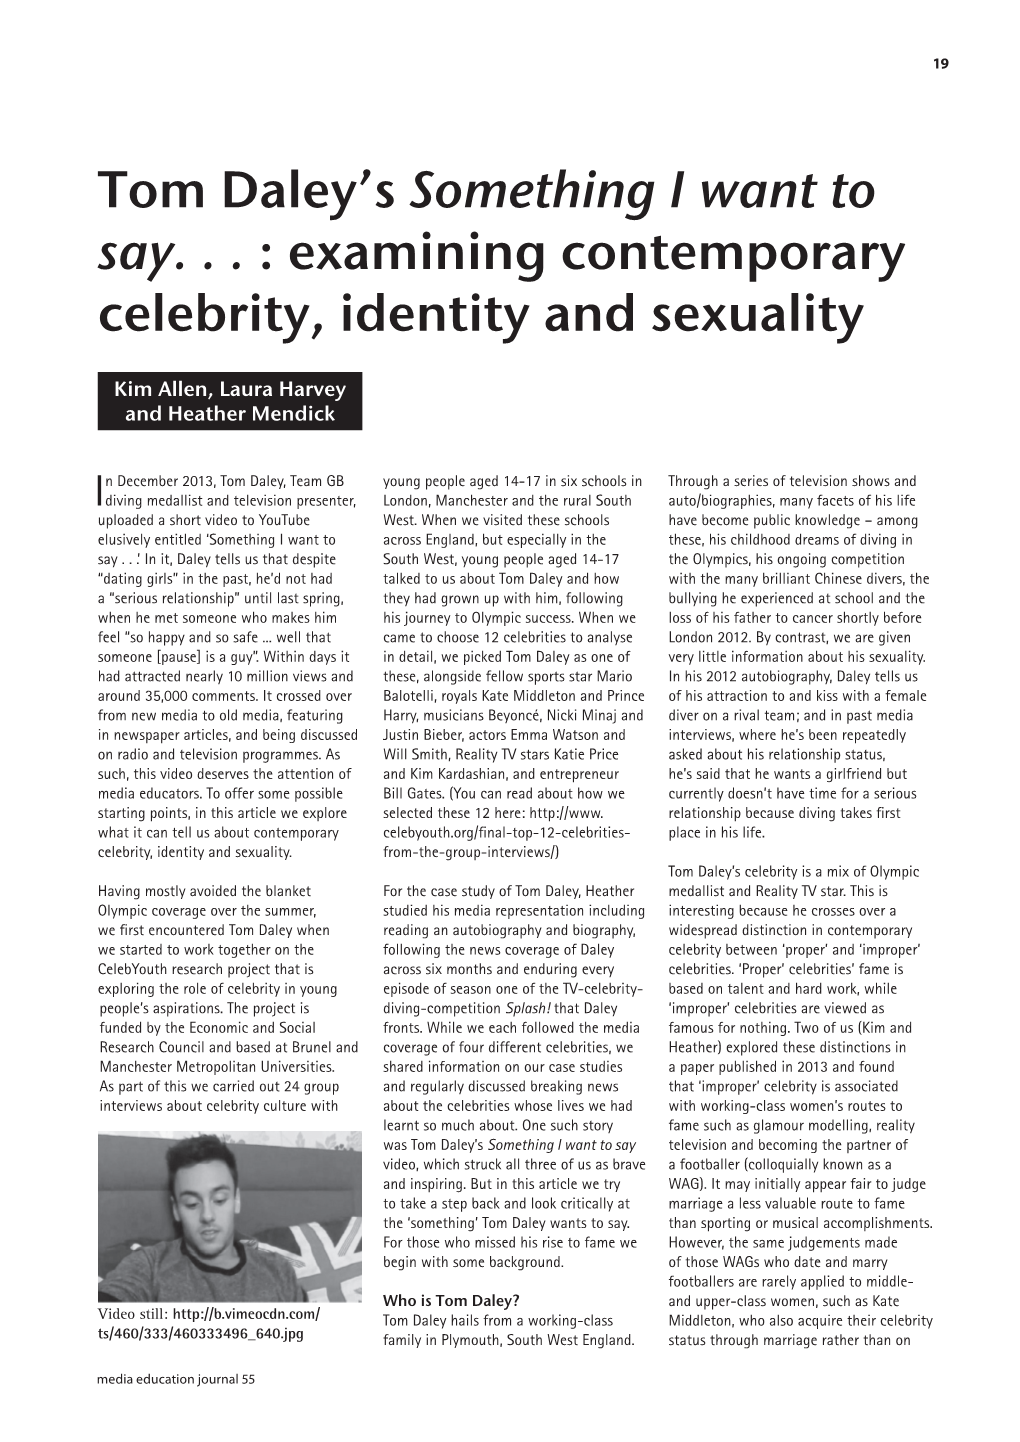 Tom Daley's Something I Want to Say. . . : Examining Contemporary Celebrity, Identity and Sexuality